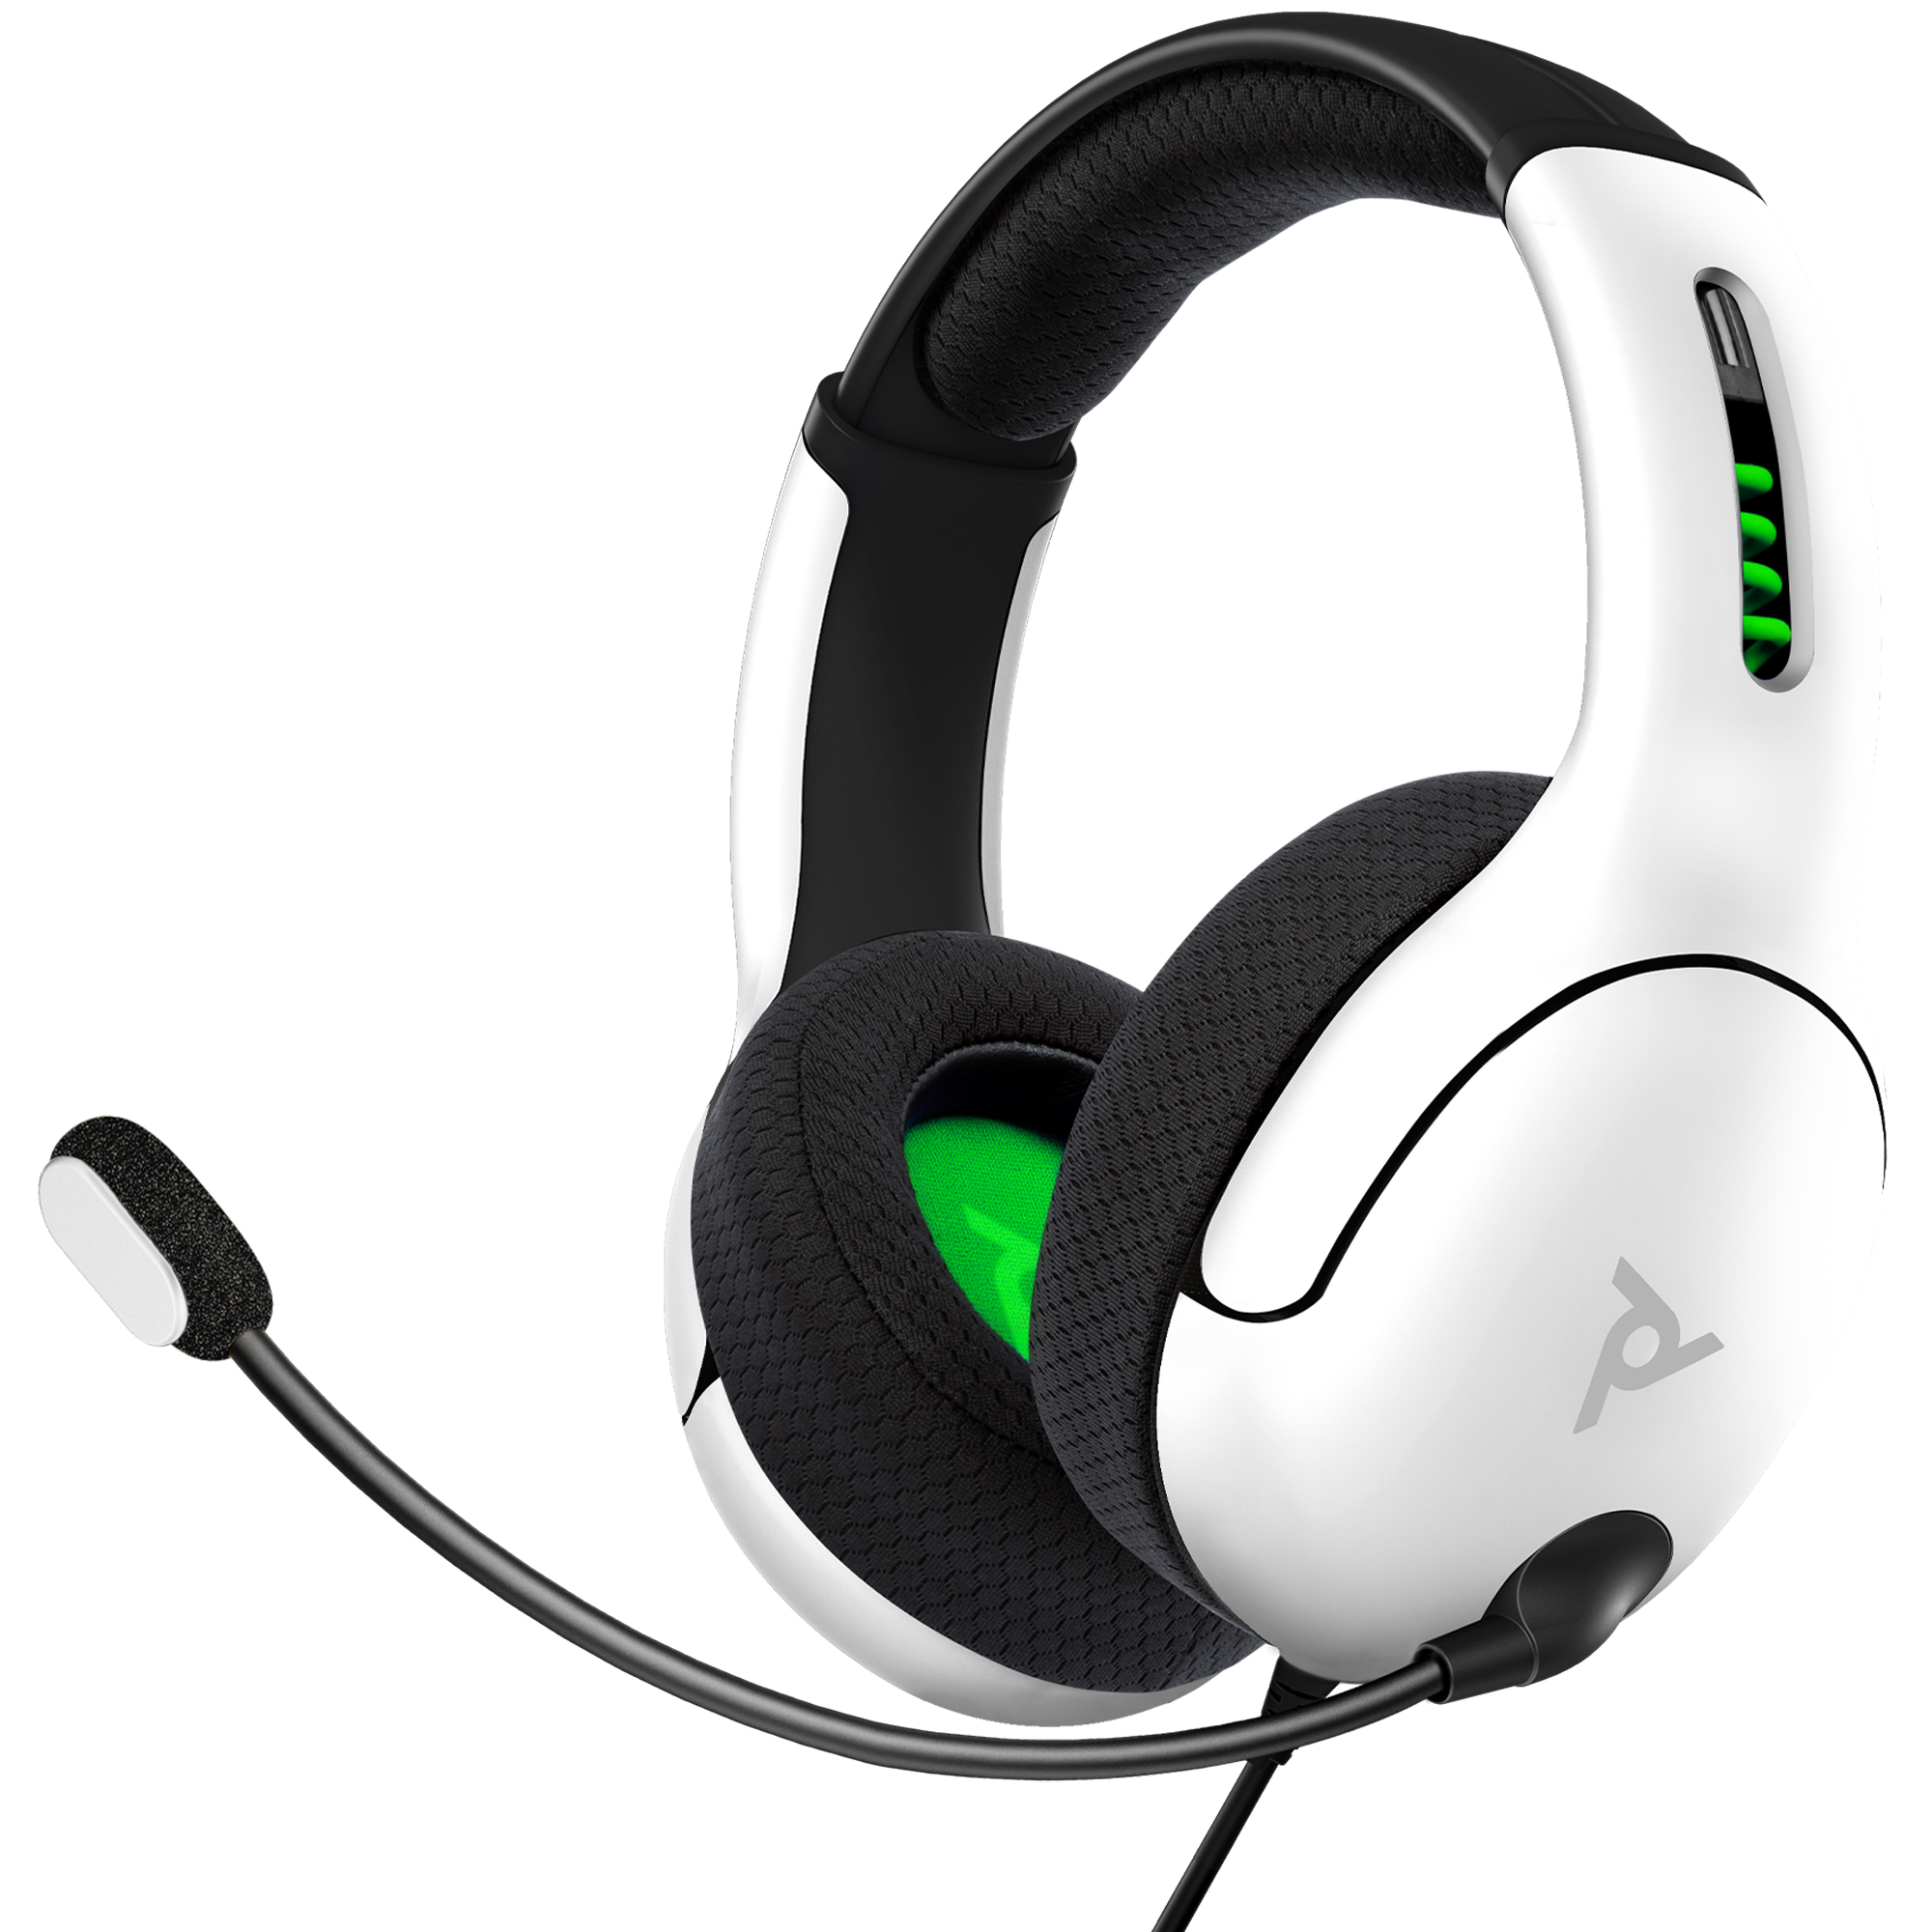 Hyperx Cloud Stinger Gaming Headset For Pc/xbox One/series X